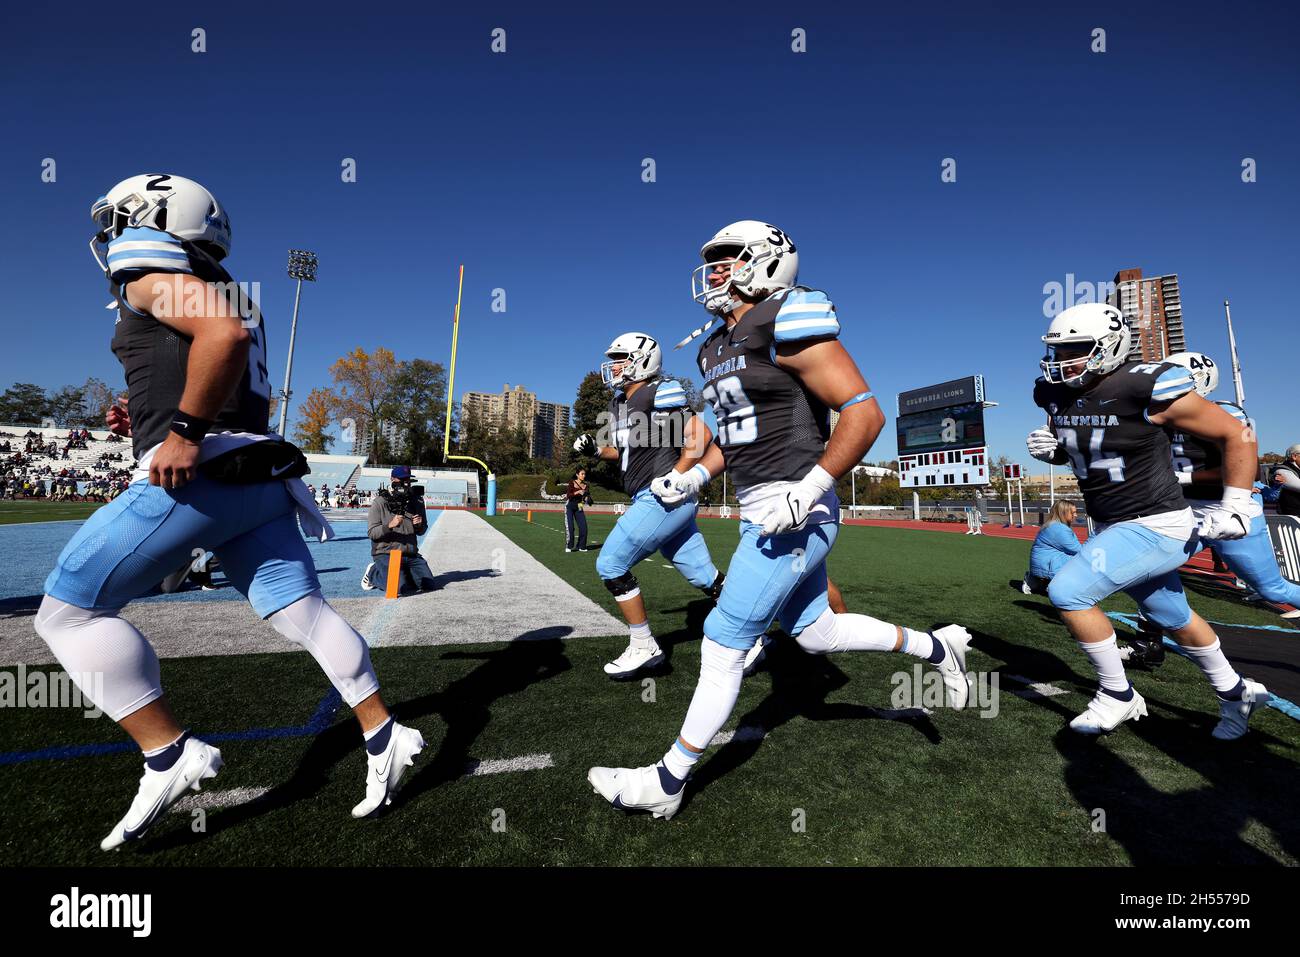 New York City, New York, United States. 6th Nov, 2021. Members of the Columbia Lions football team take to the field at Wien Stadium in New York at the start of their game today against the Harvard Crimson. Harvard won the game 49-21. Credit: Adam Stoltman/Alamy Live News Stock Photo